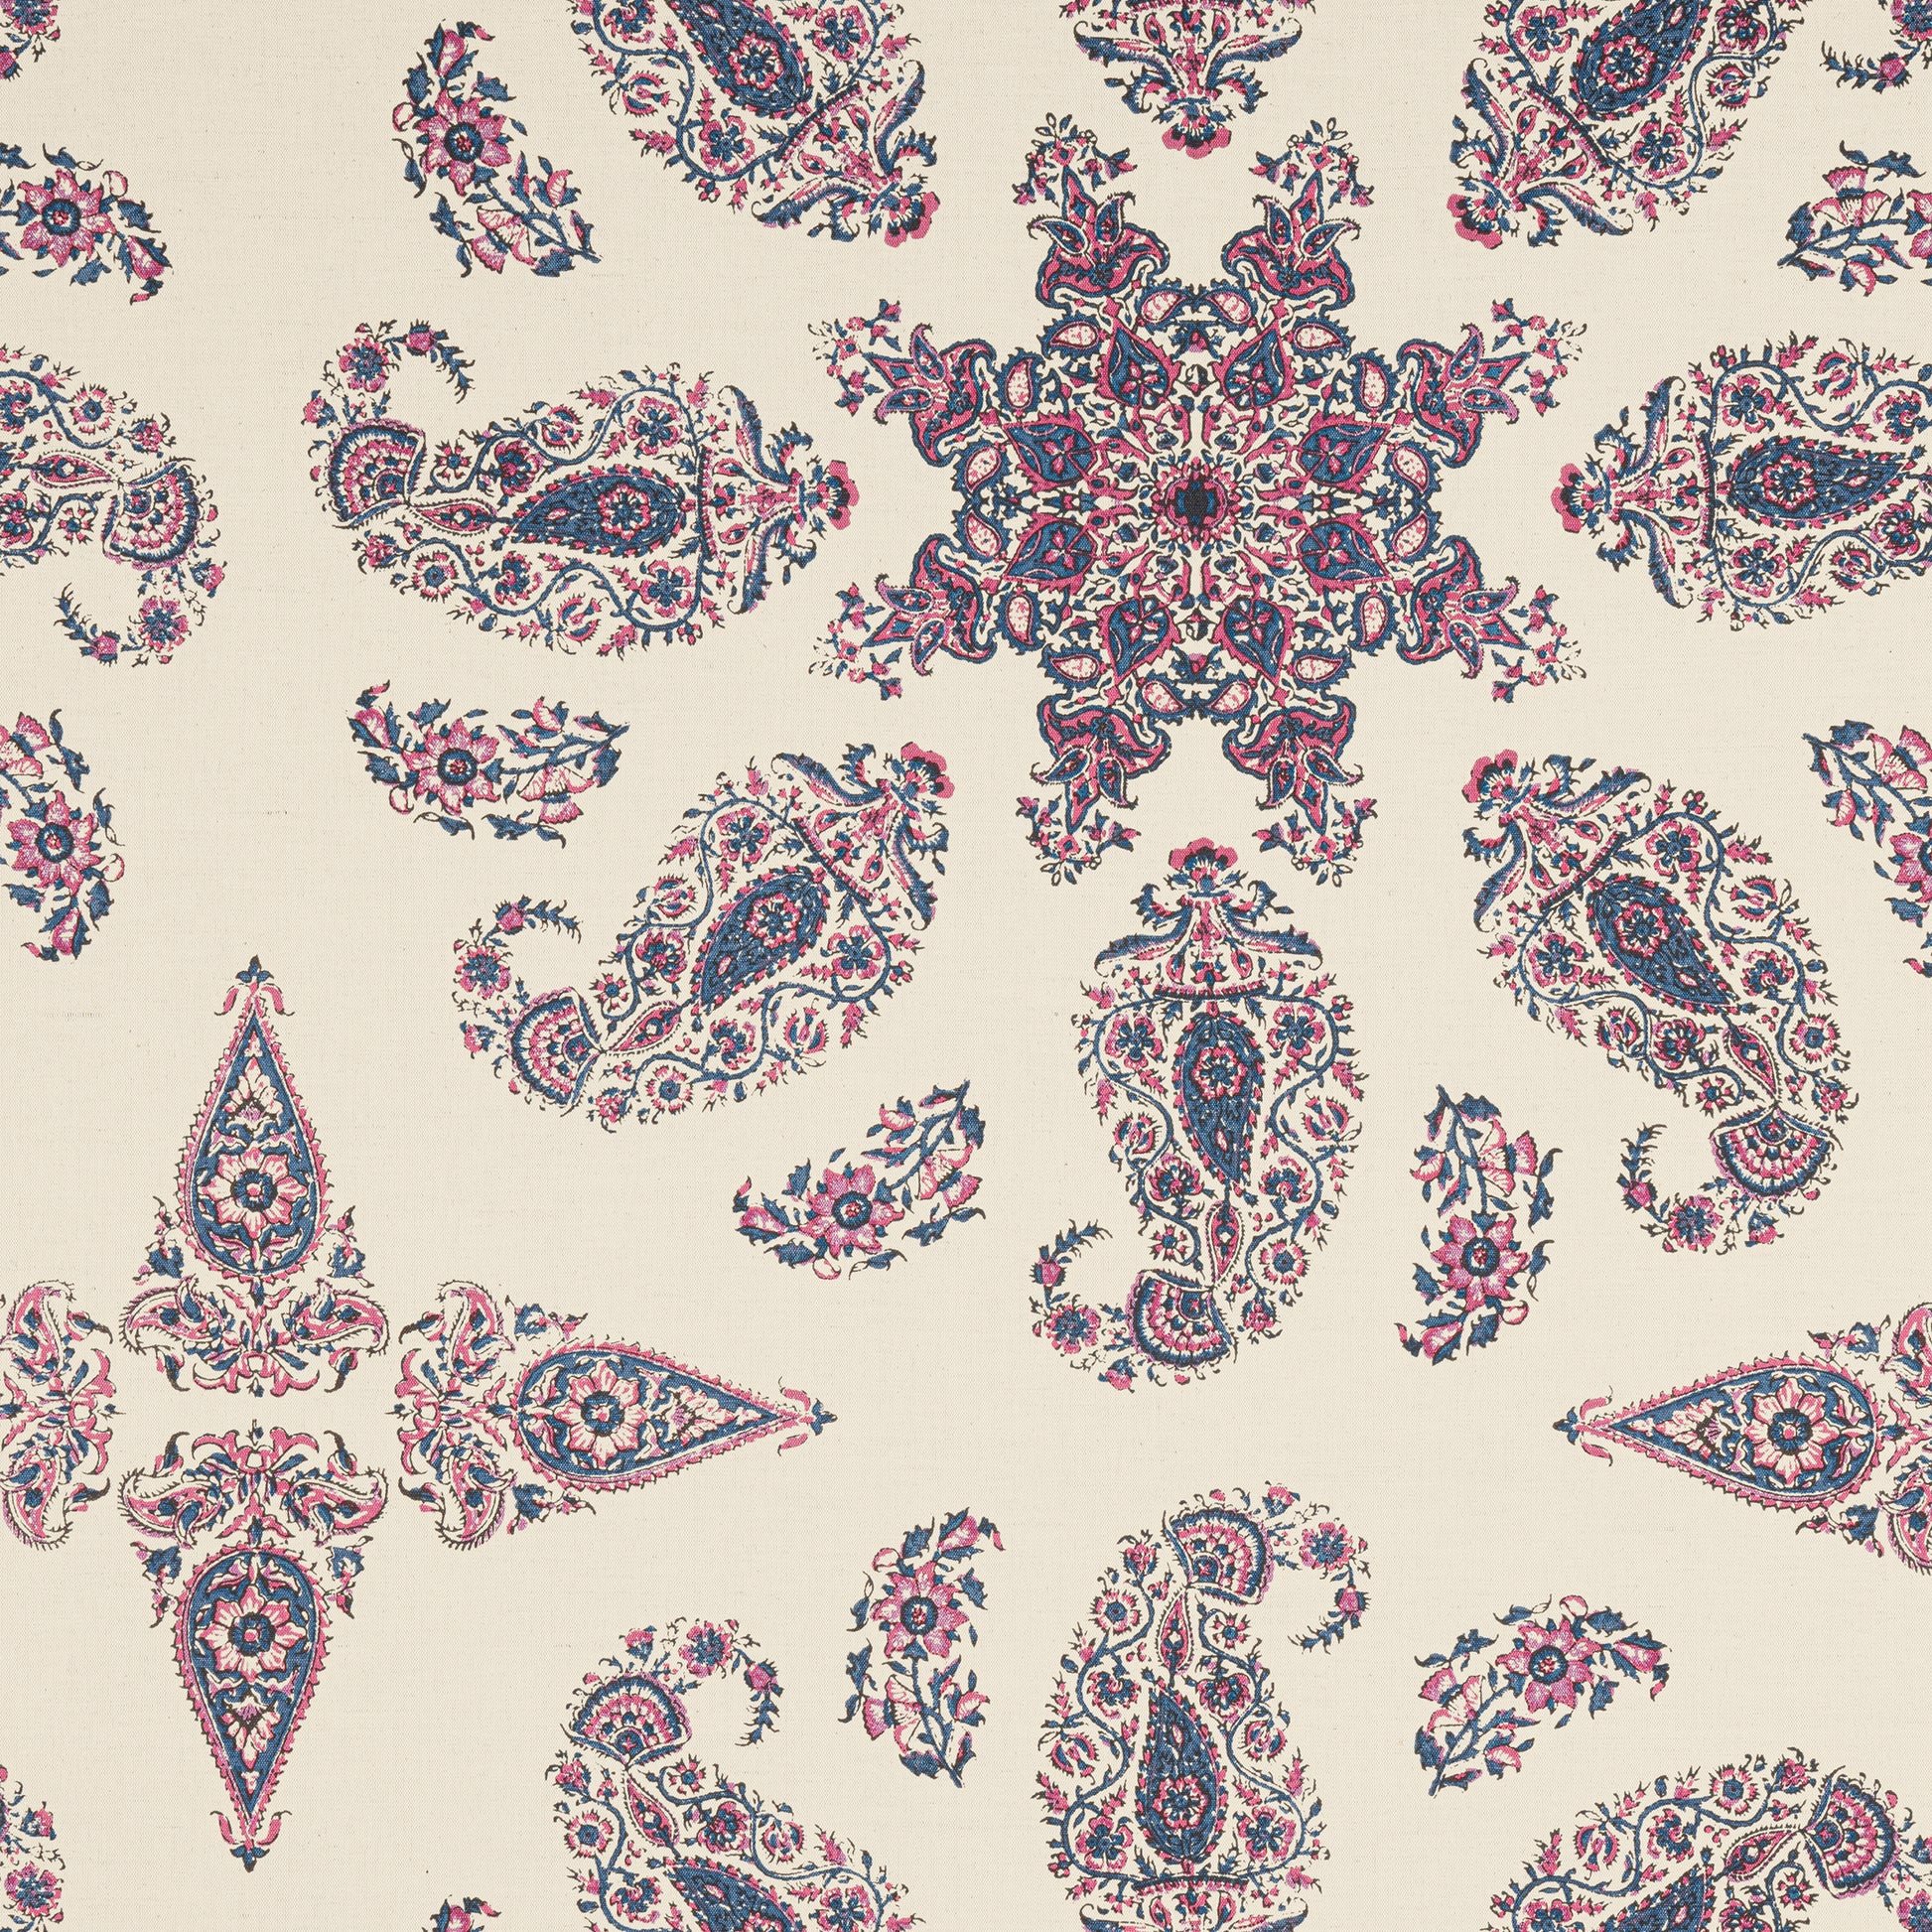 Purchase Thibaut Fabric Product F936430 pattern name East India color Raspberry and Blue on Natural